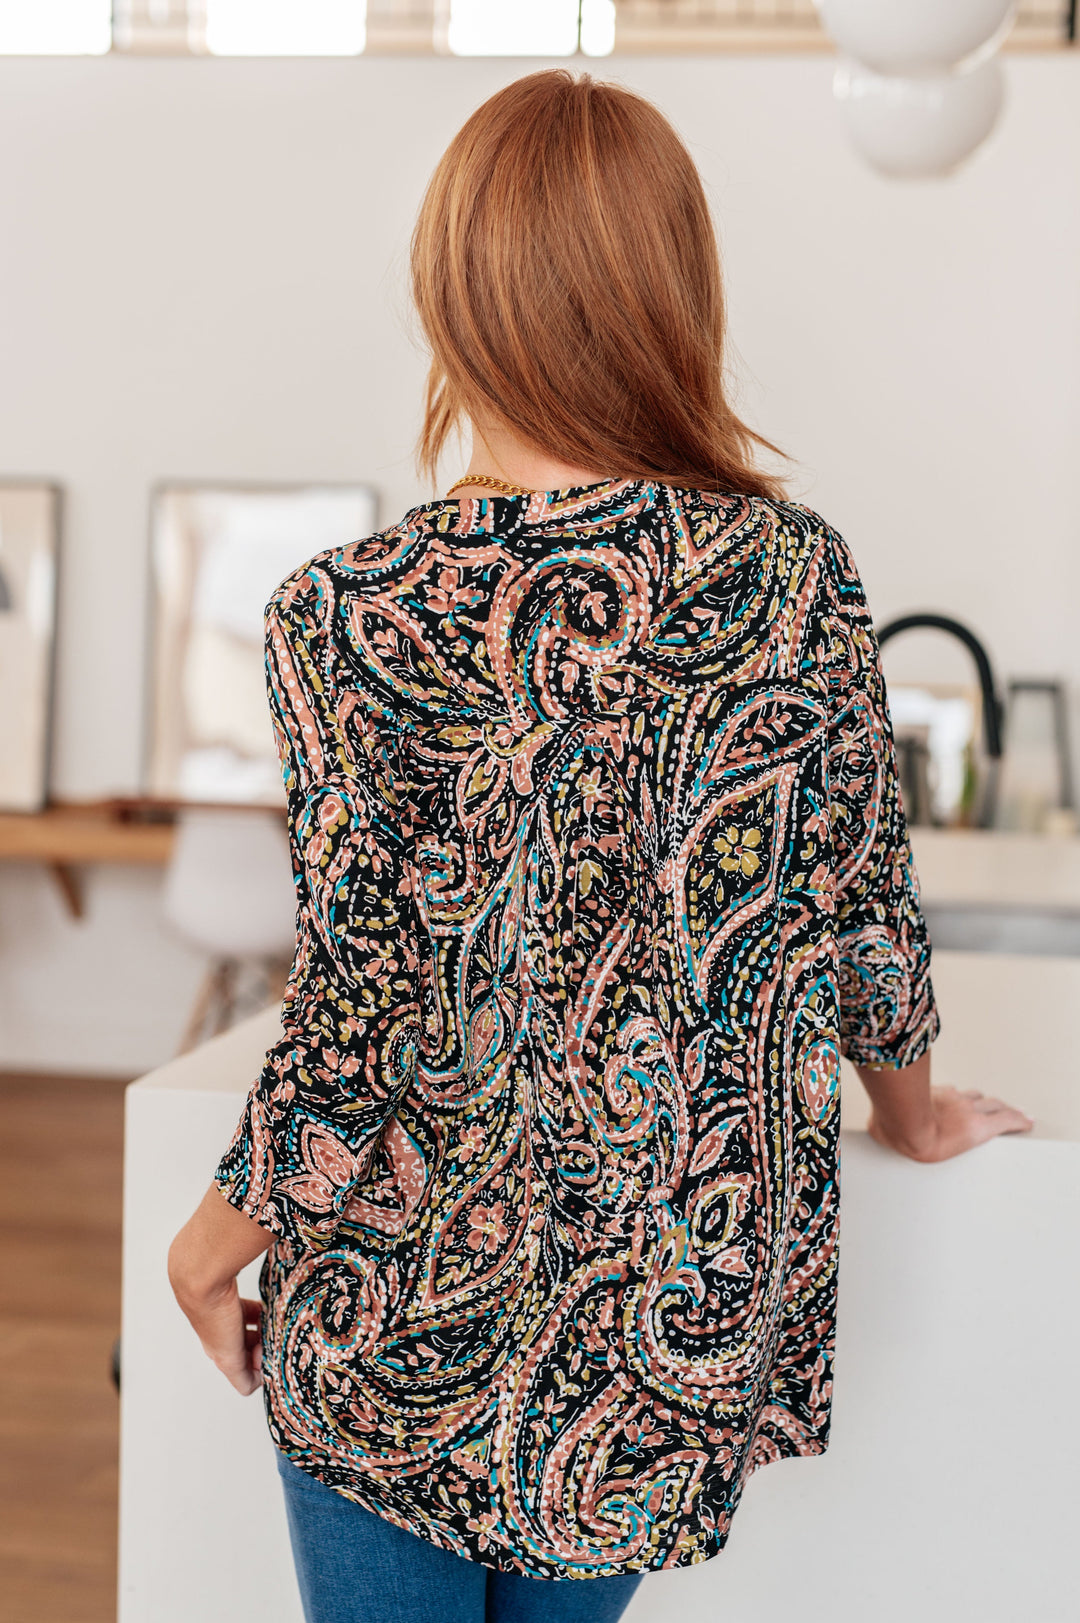 I Think Different Top Teal Paisley-Long Sleeve Tops-Inspired by Justeen-Women's Clothing Boutique in Chicago, Illinois